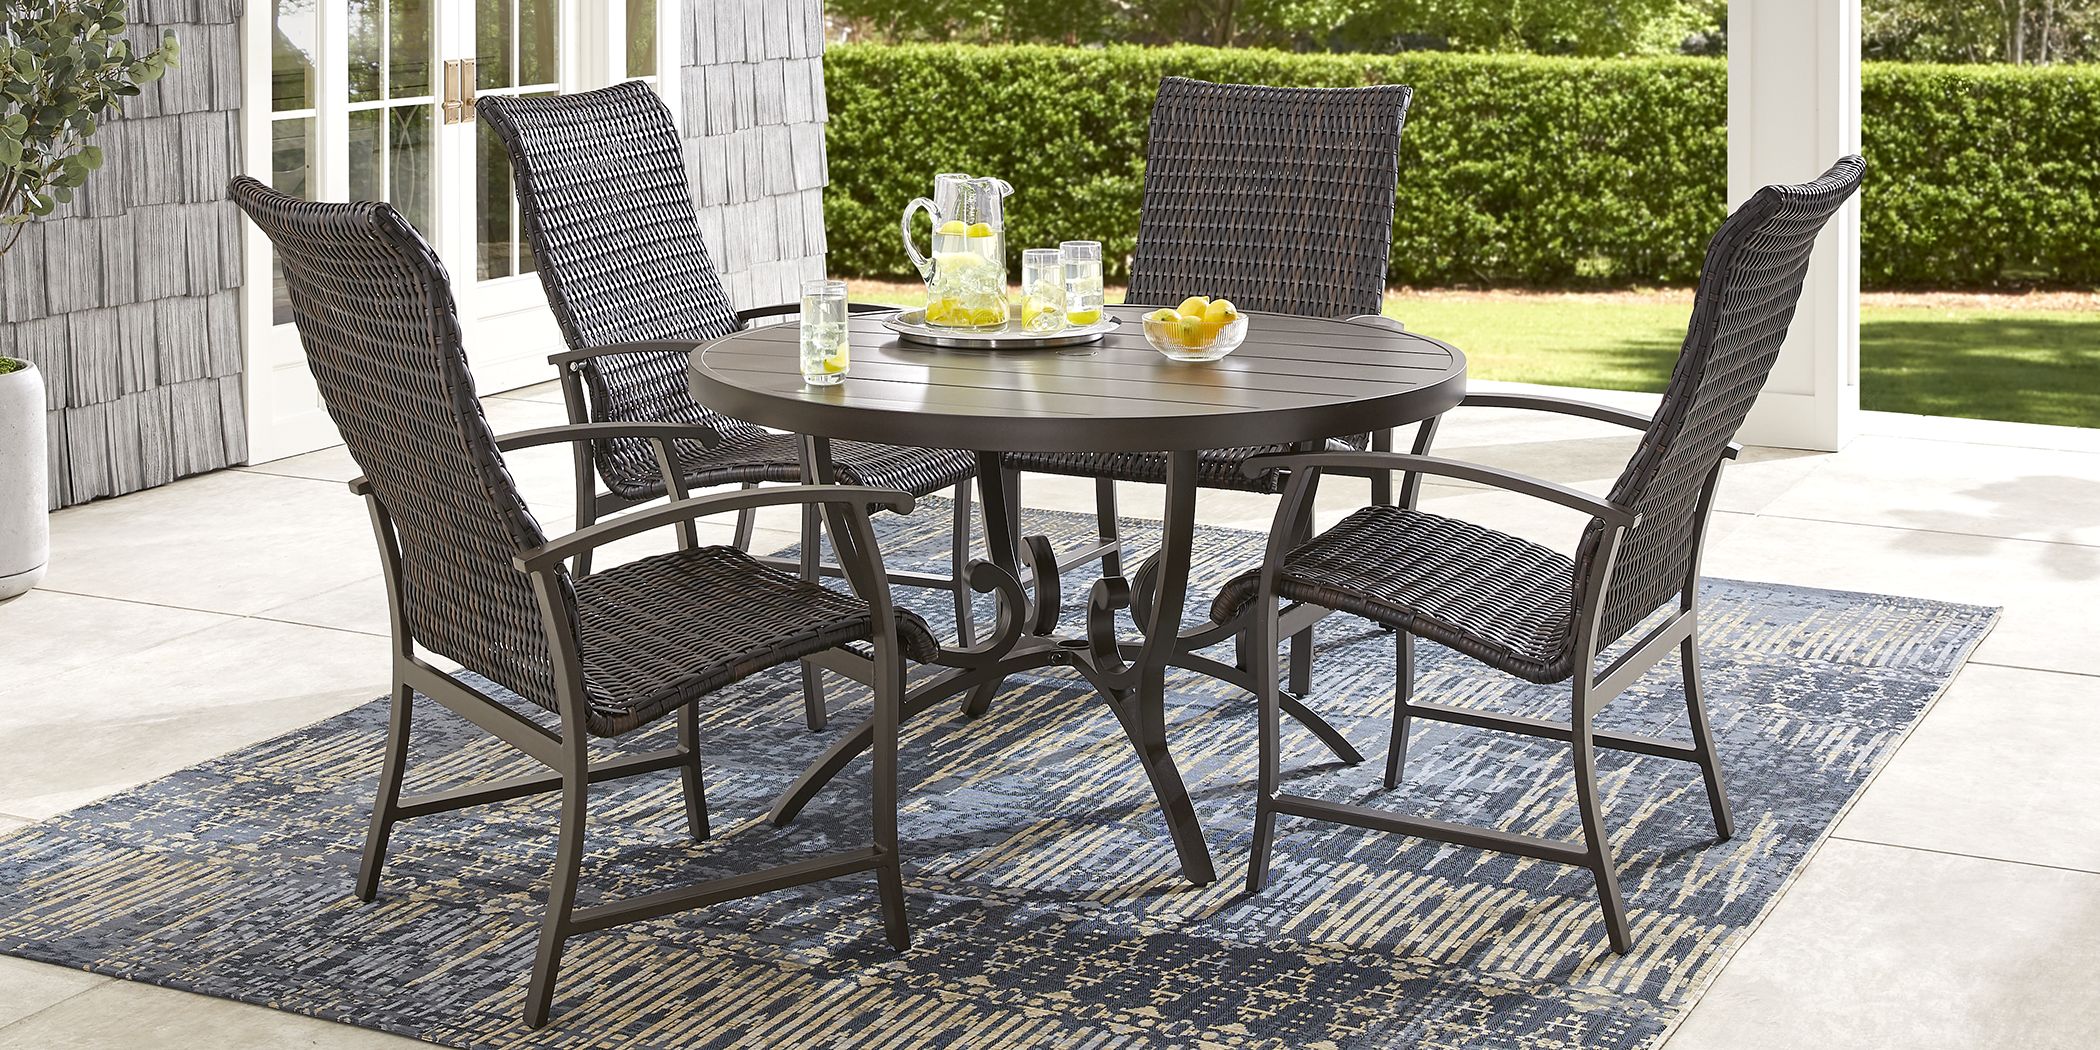 Round Outdoor Patio Dining Sets, Outdoor Round Patio Tables And Chairs